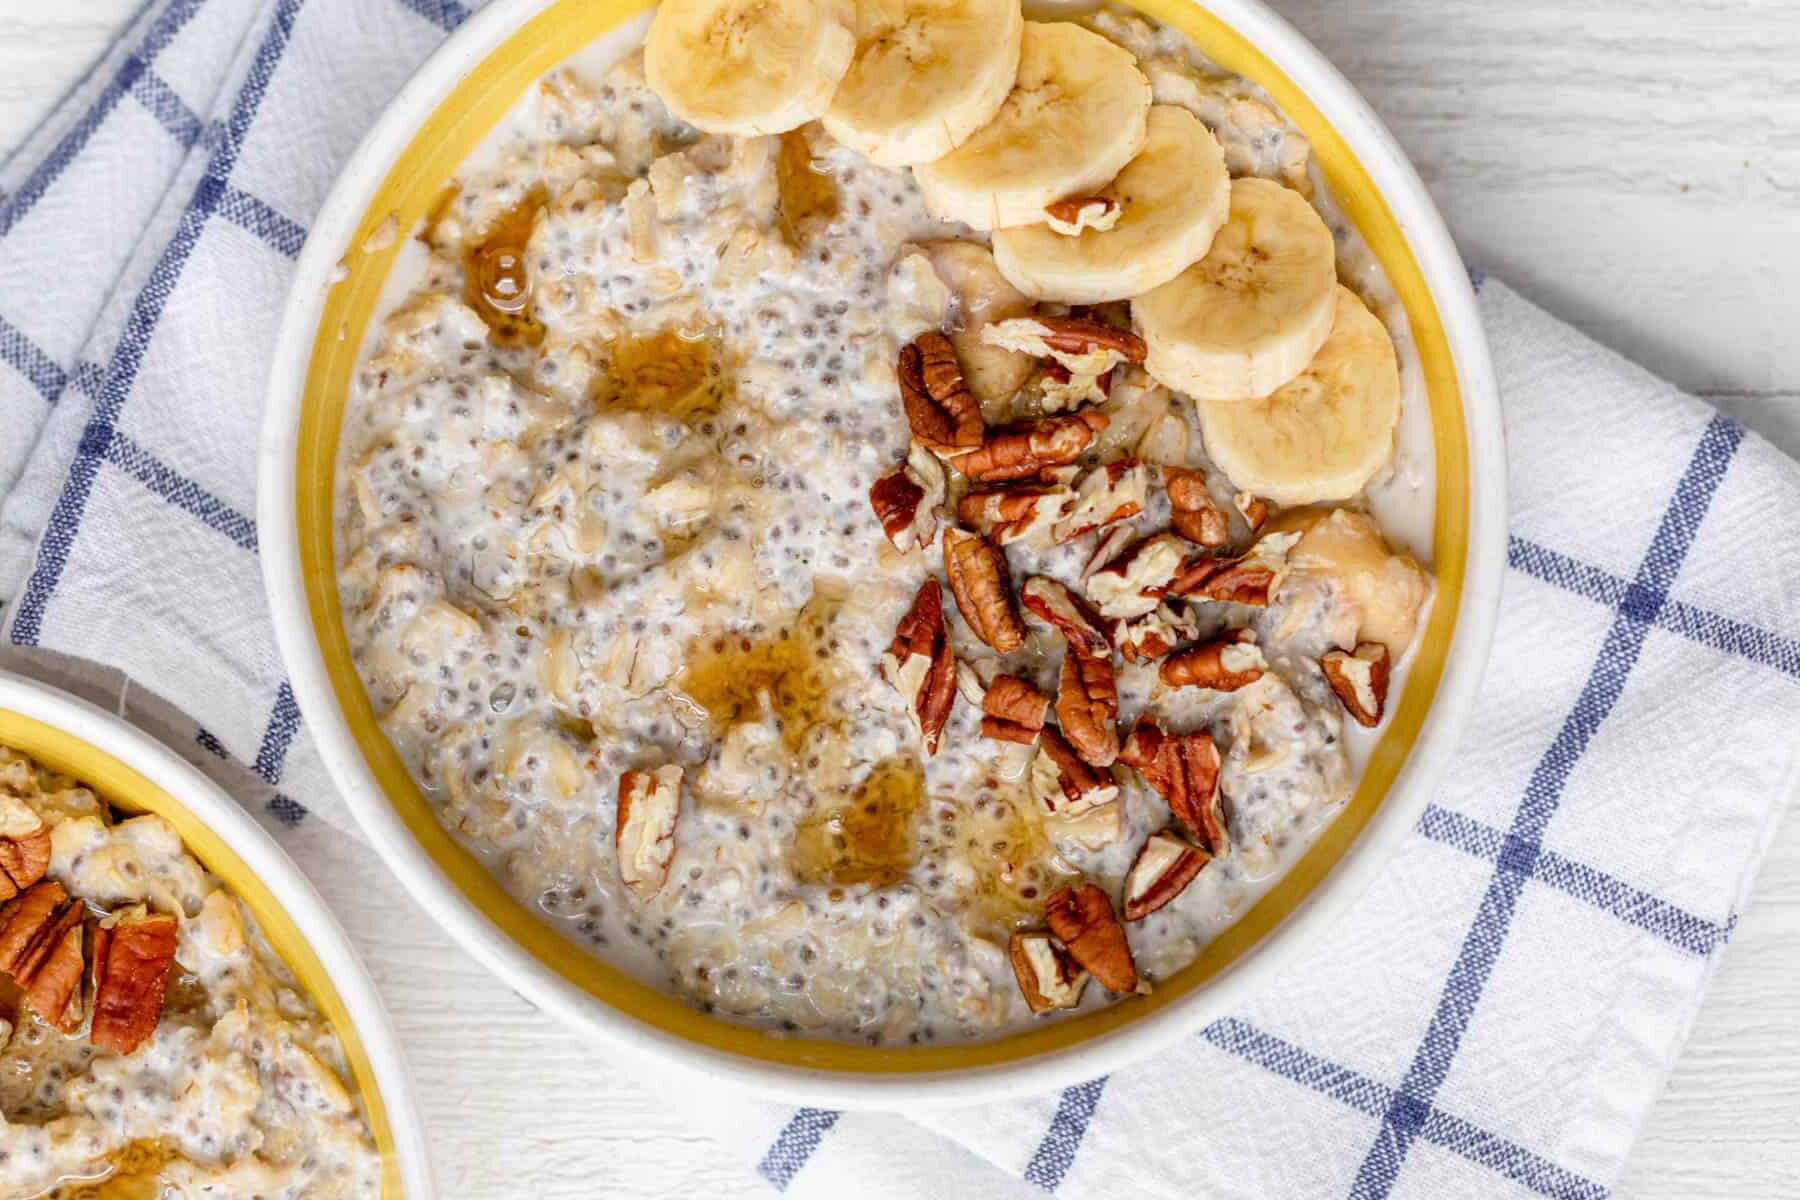 https://feelgoodfoodie.net/wp-content/uploads/2023/09/Protein-Oatmeal-with-Bananas-7-edited.jpg